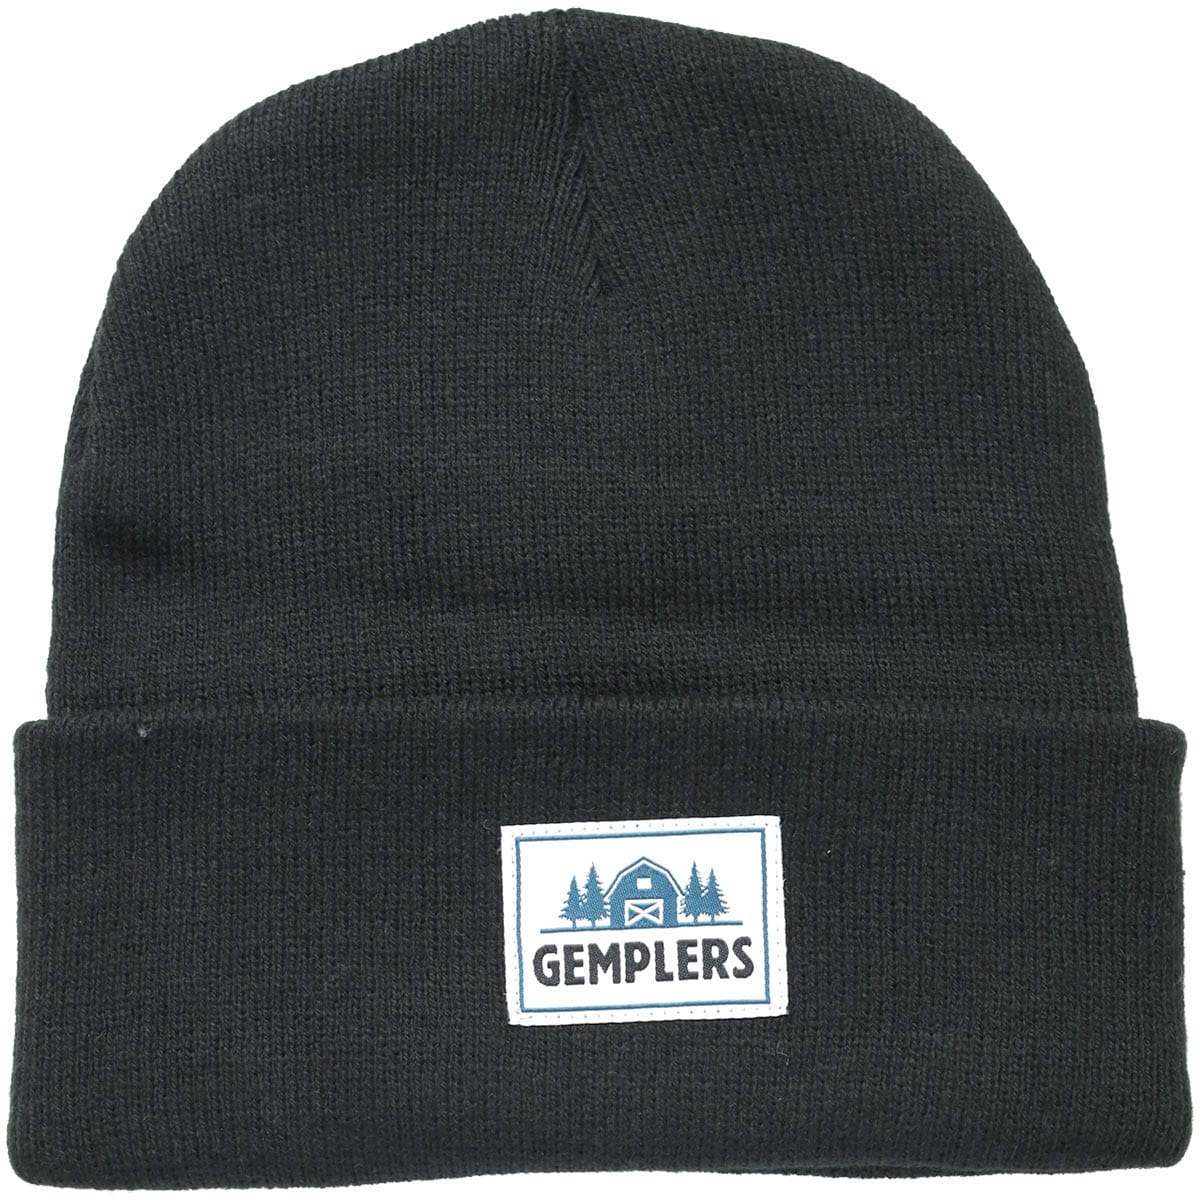 Gemplers Knit Beanie